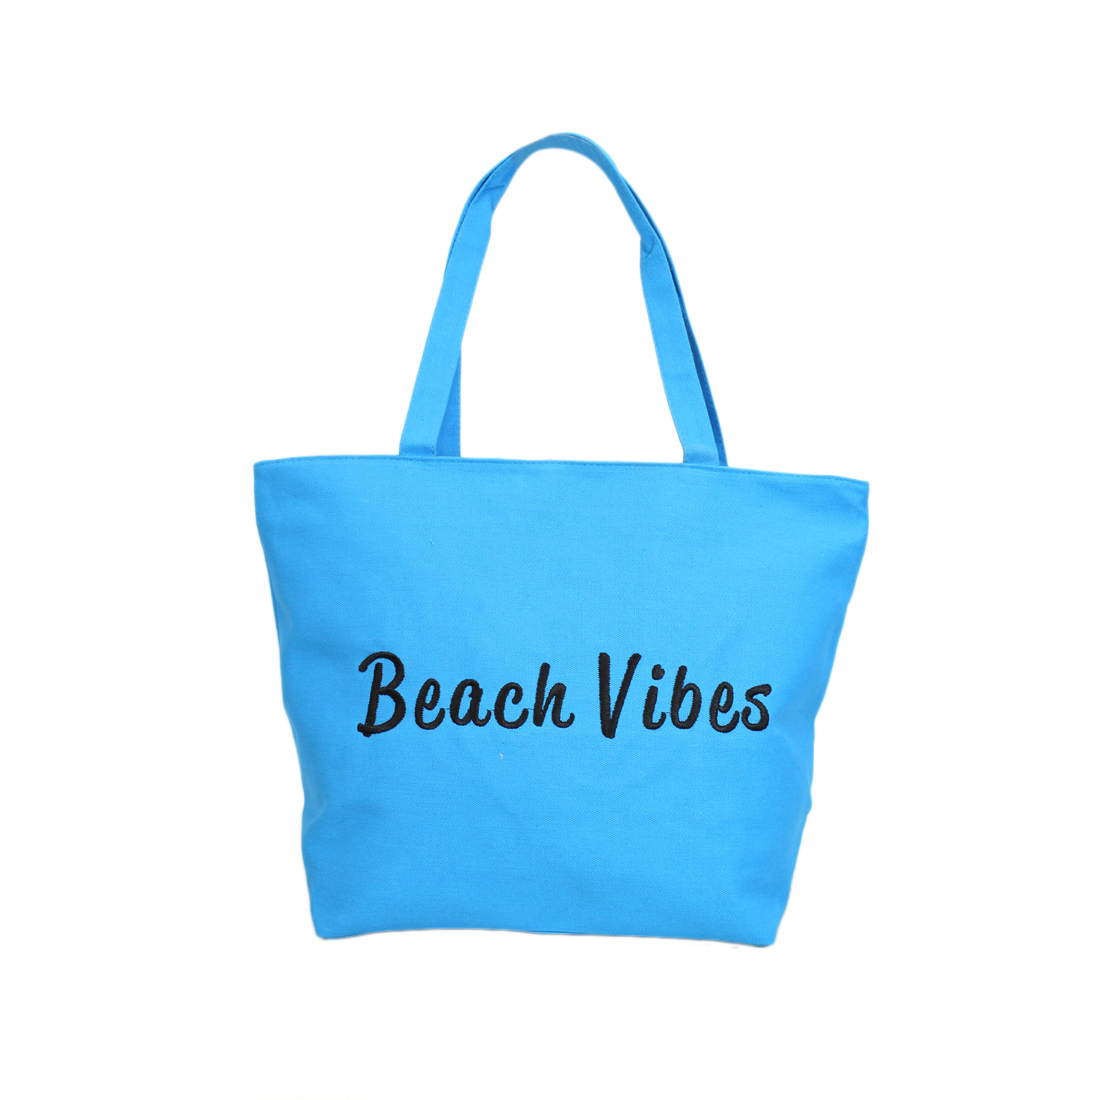 Fabric with beach vibes wording embroidered infront